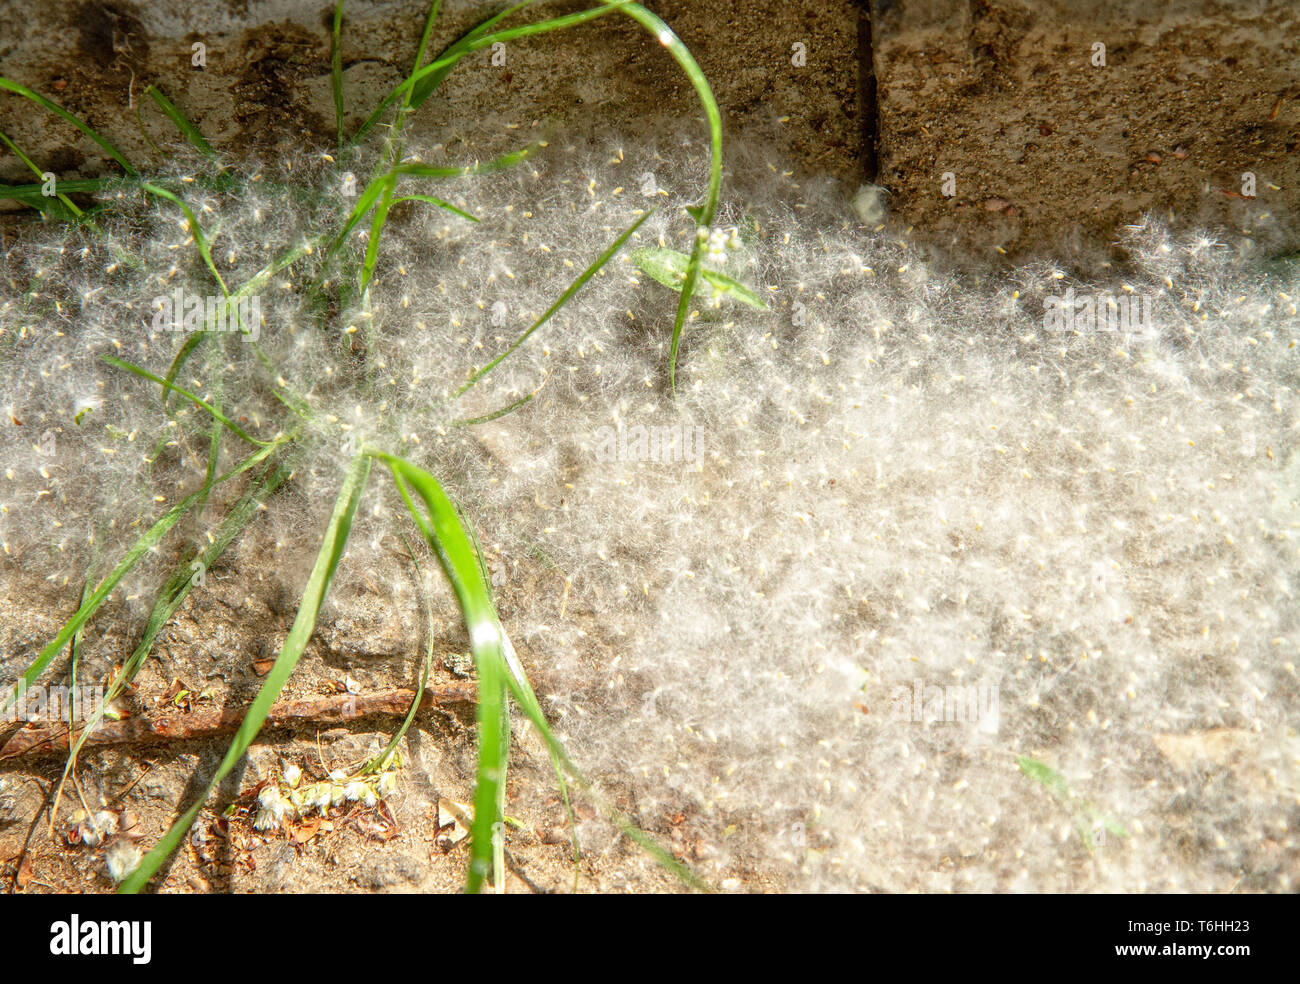 allergenic spring seeds of poplar fluff lying on the ground Stock Photo